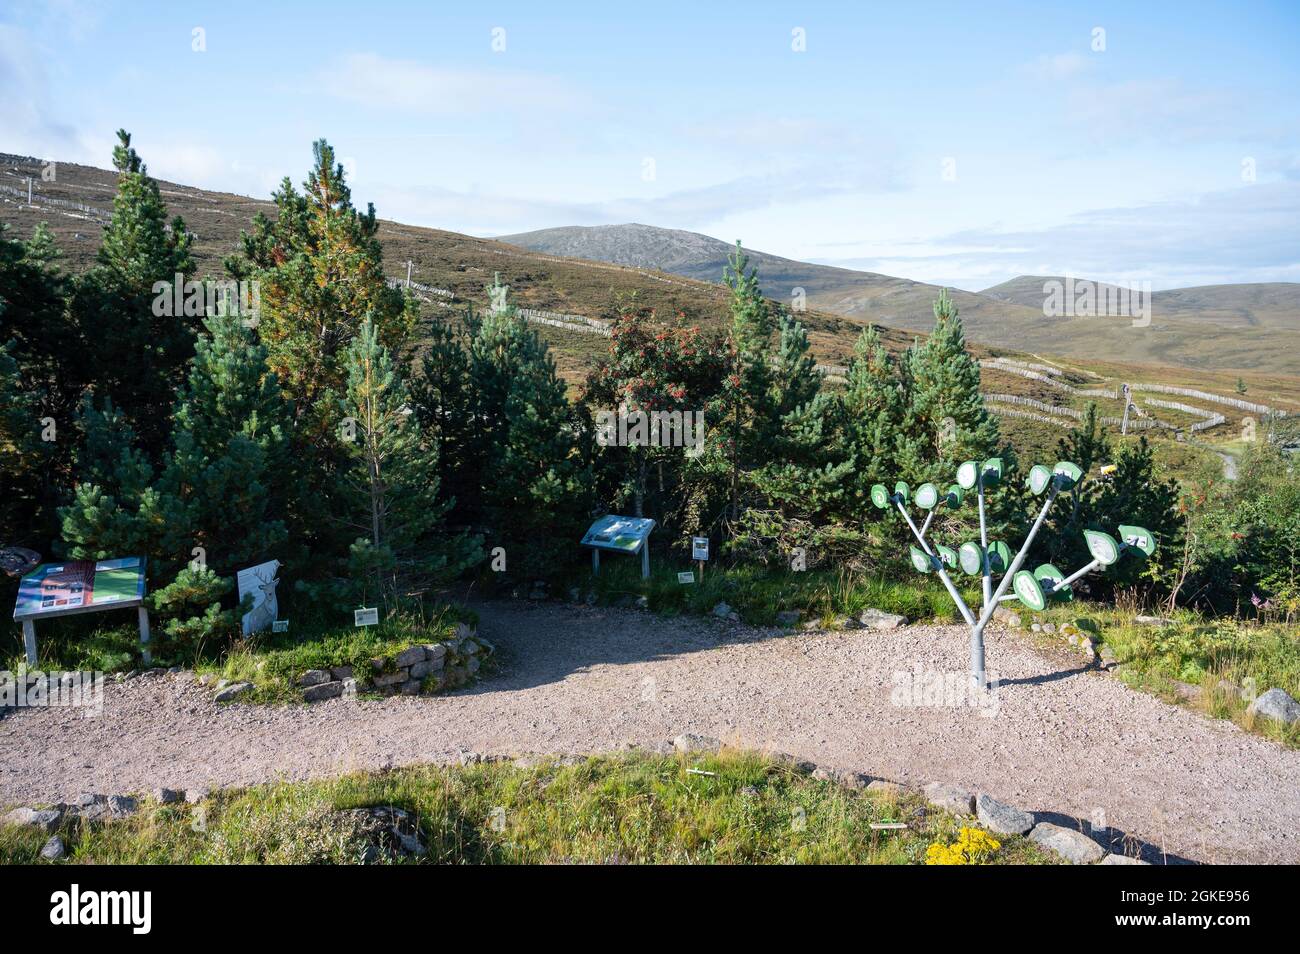 Cairngorm Wild Mountain Garden looking over Coire Cas and the ski area towards the mountains. Sunny day with no people. Stock Photo